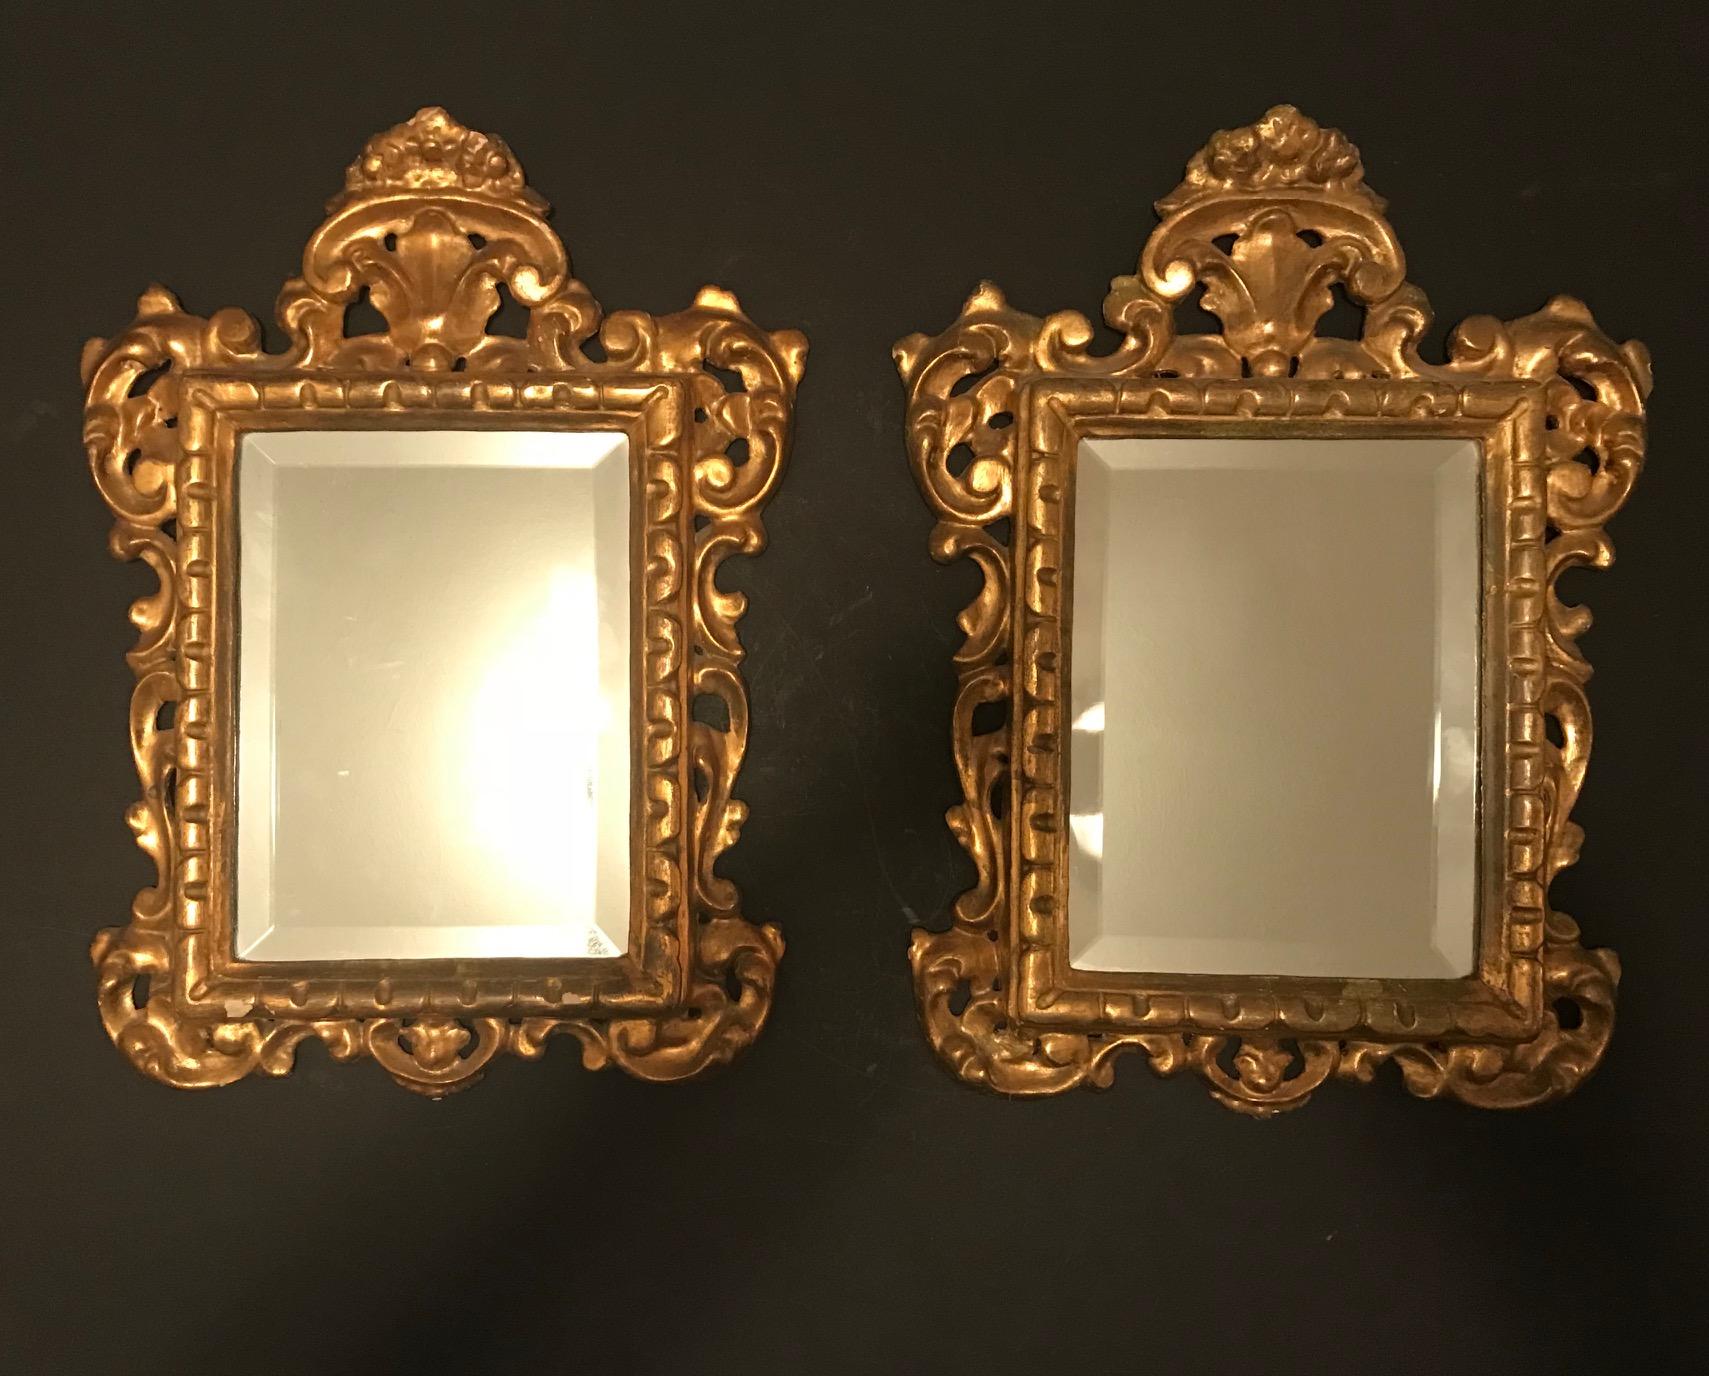 This is a pair of Venetian giltwood mirrors. The rectangular mirror plates are within a boldly carved scrolling acanthus frame with a carved leaf crown piece. The elaborately carved frame has the original water gilding.

Venetian style refers to